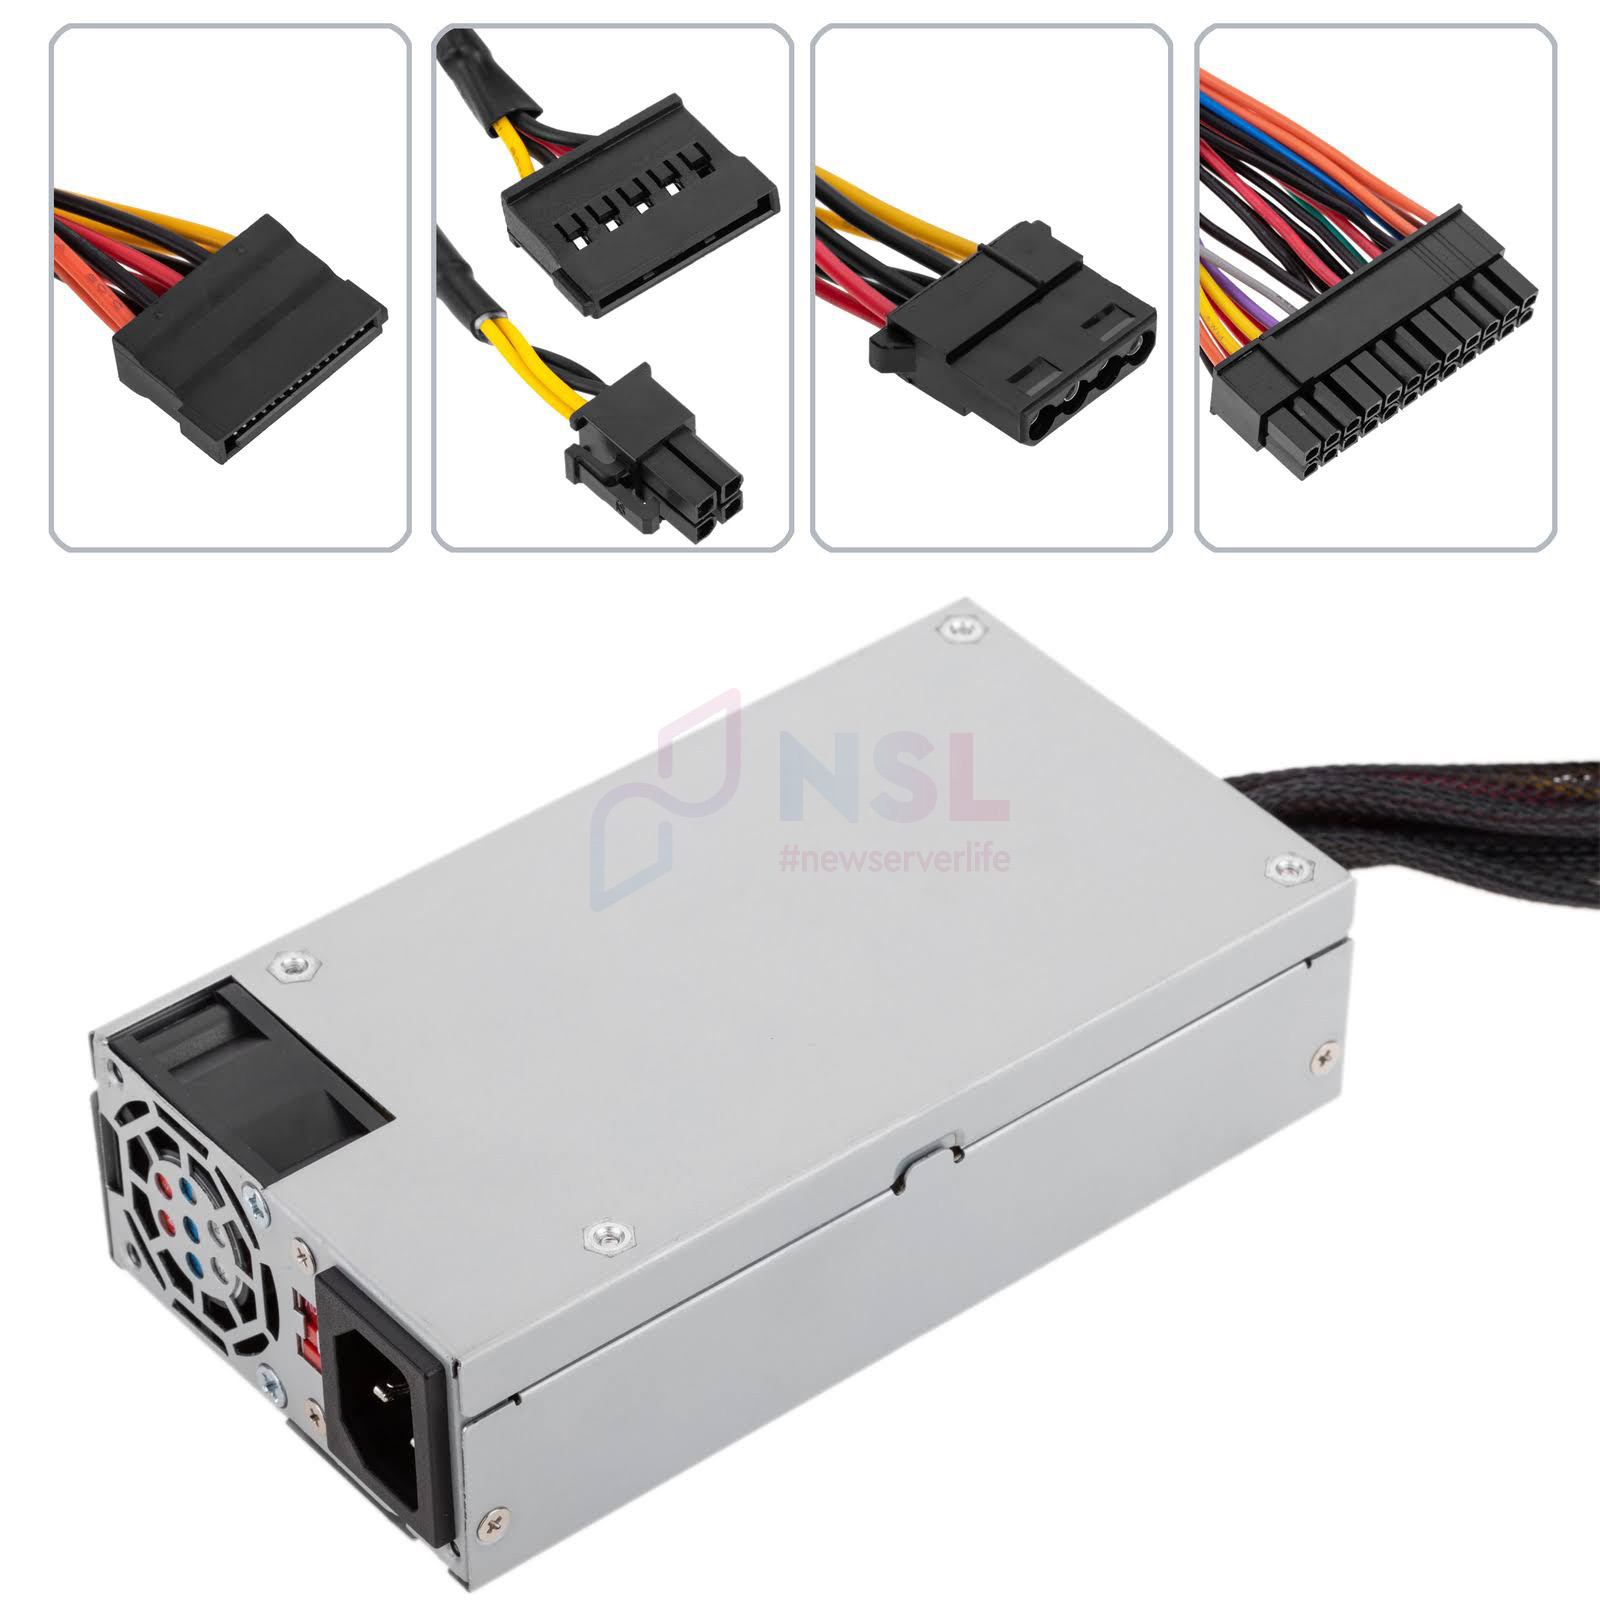 Types and features of power supplies